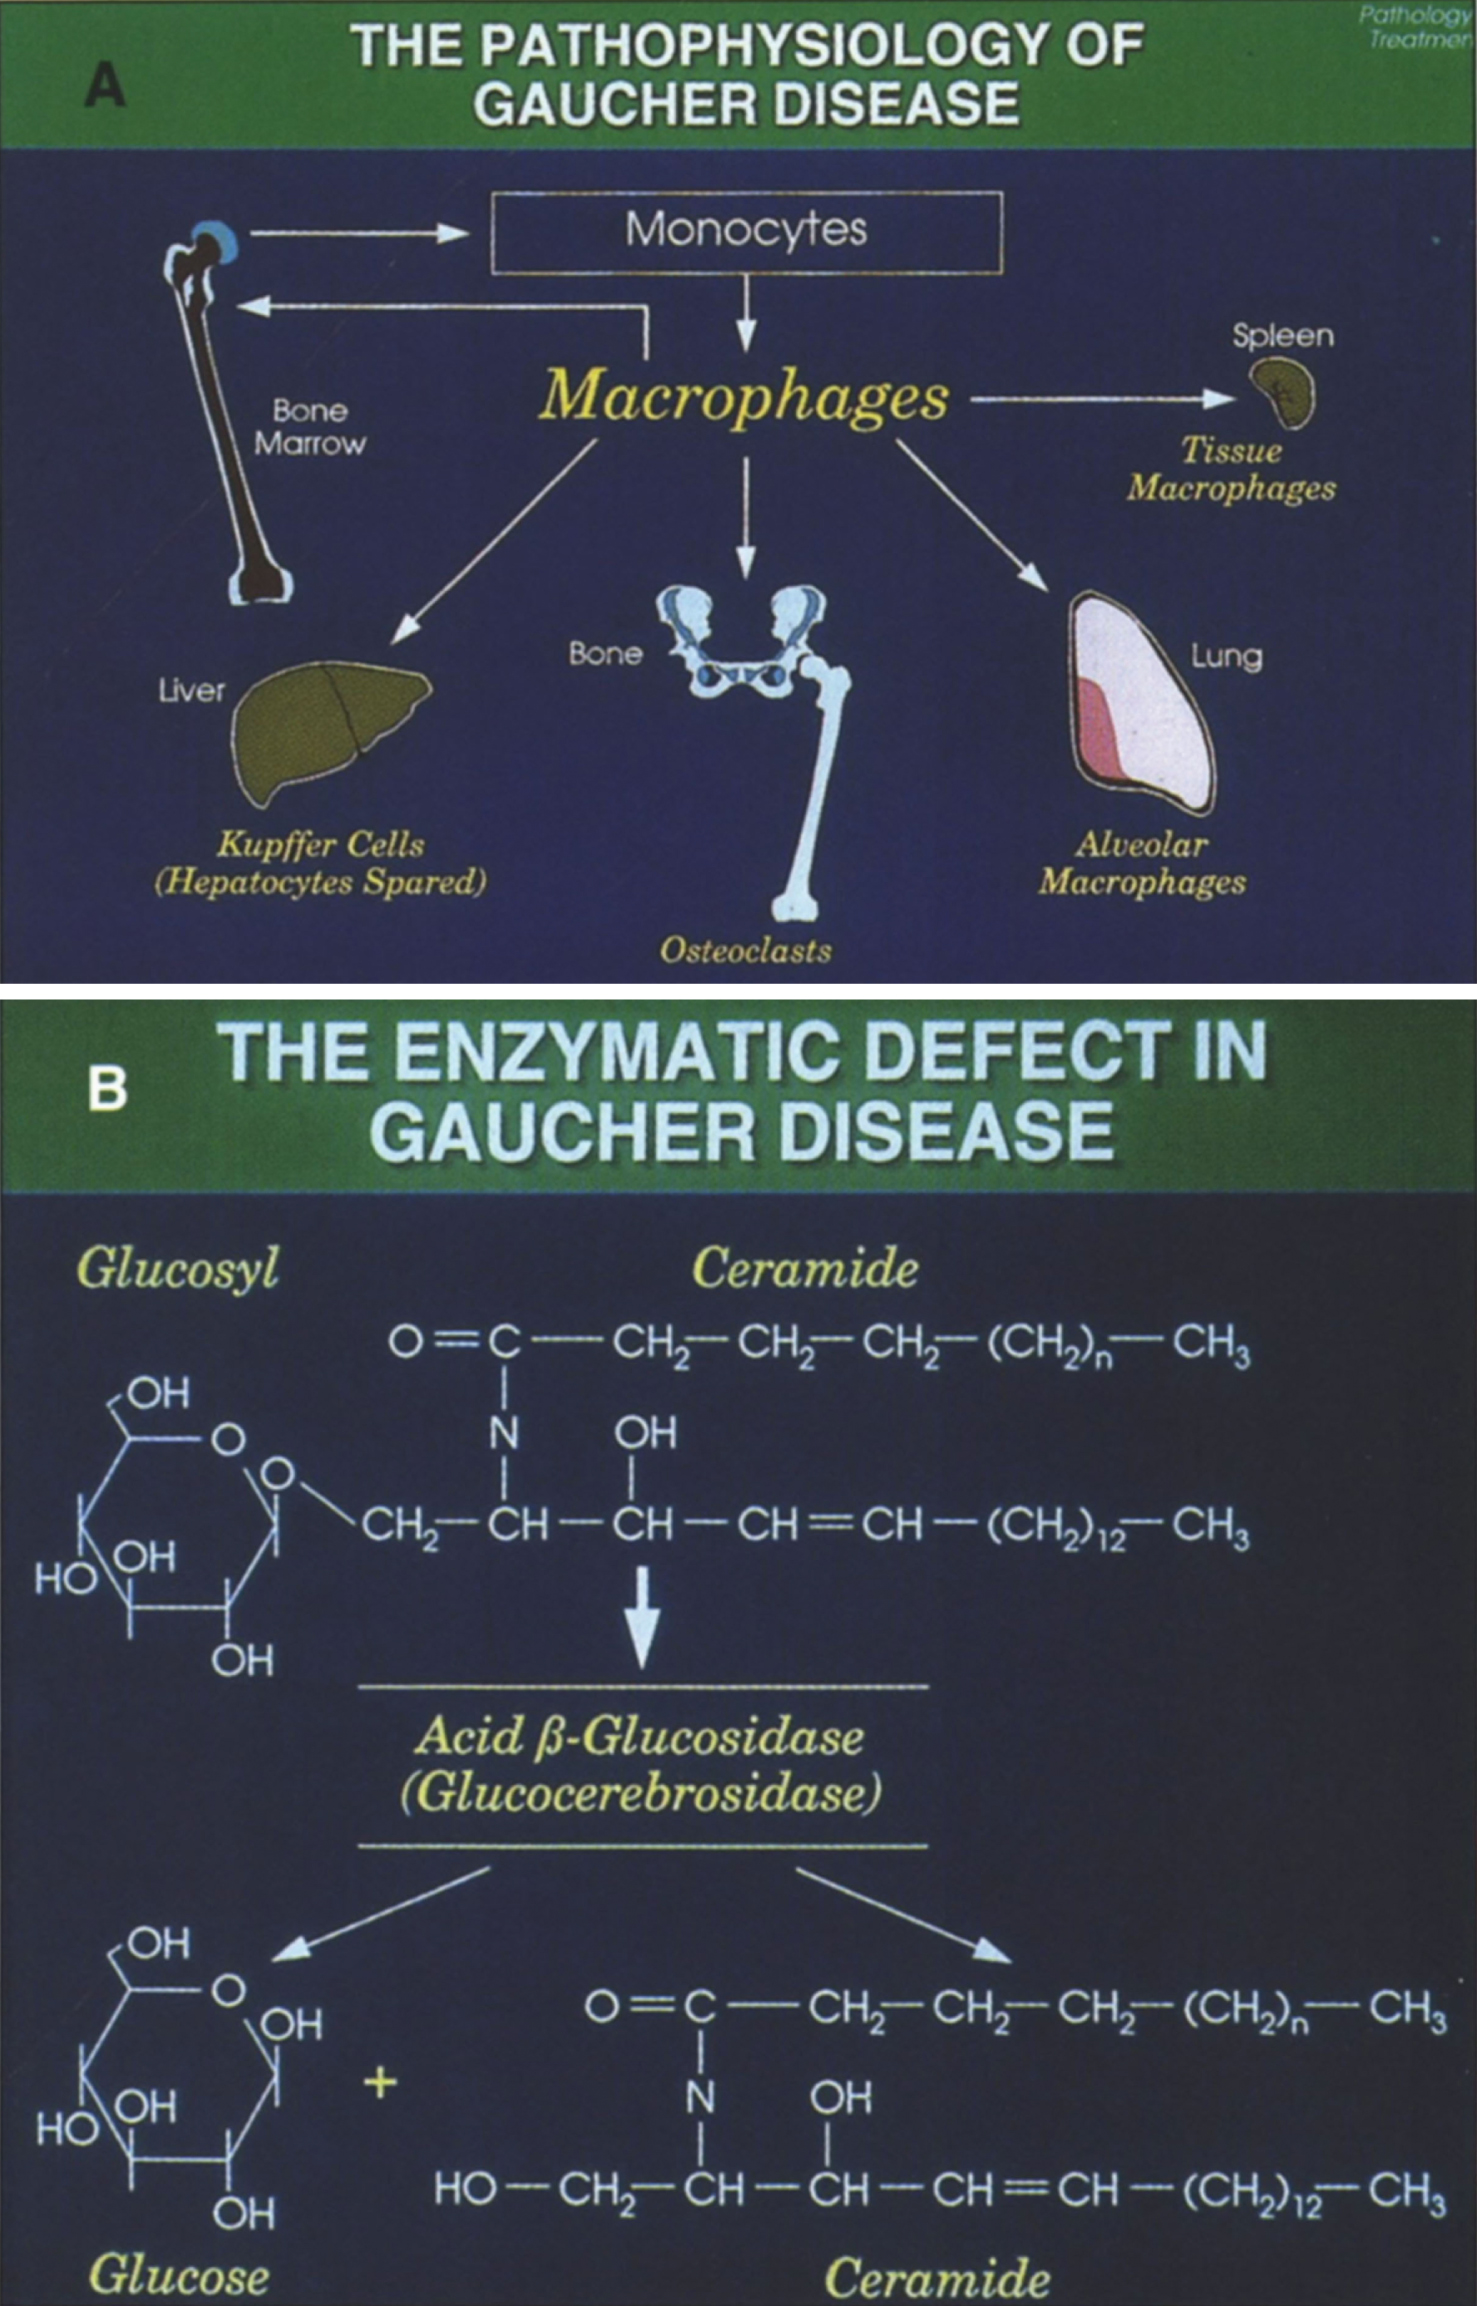 (A) The pathophysiology of Gaucher disease. It should be noted that this macrophage-centric view of the disease has recently been called into question, since it does not explain certain aspects of the disease such as the predisposition to malignancy, osteoporosis or Parkinson disease (108). (B) The enzymatic defect in Gaucher disease. (From Gaucher Disease Diagnosis Evaluation and Treatment, Genzyme Therapeutics, Parsipanny, NJ; with permission.)